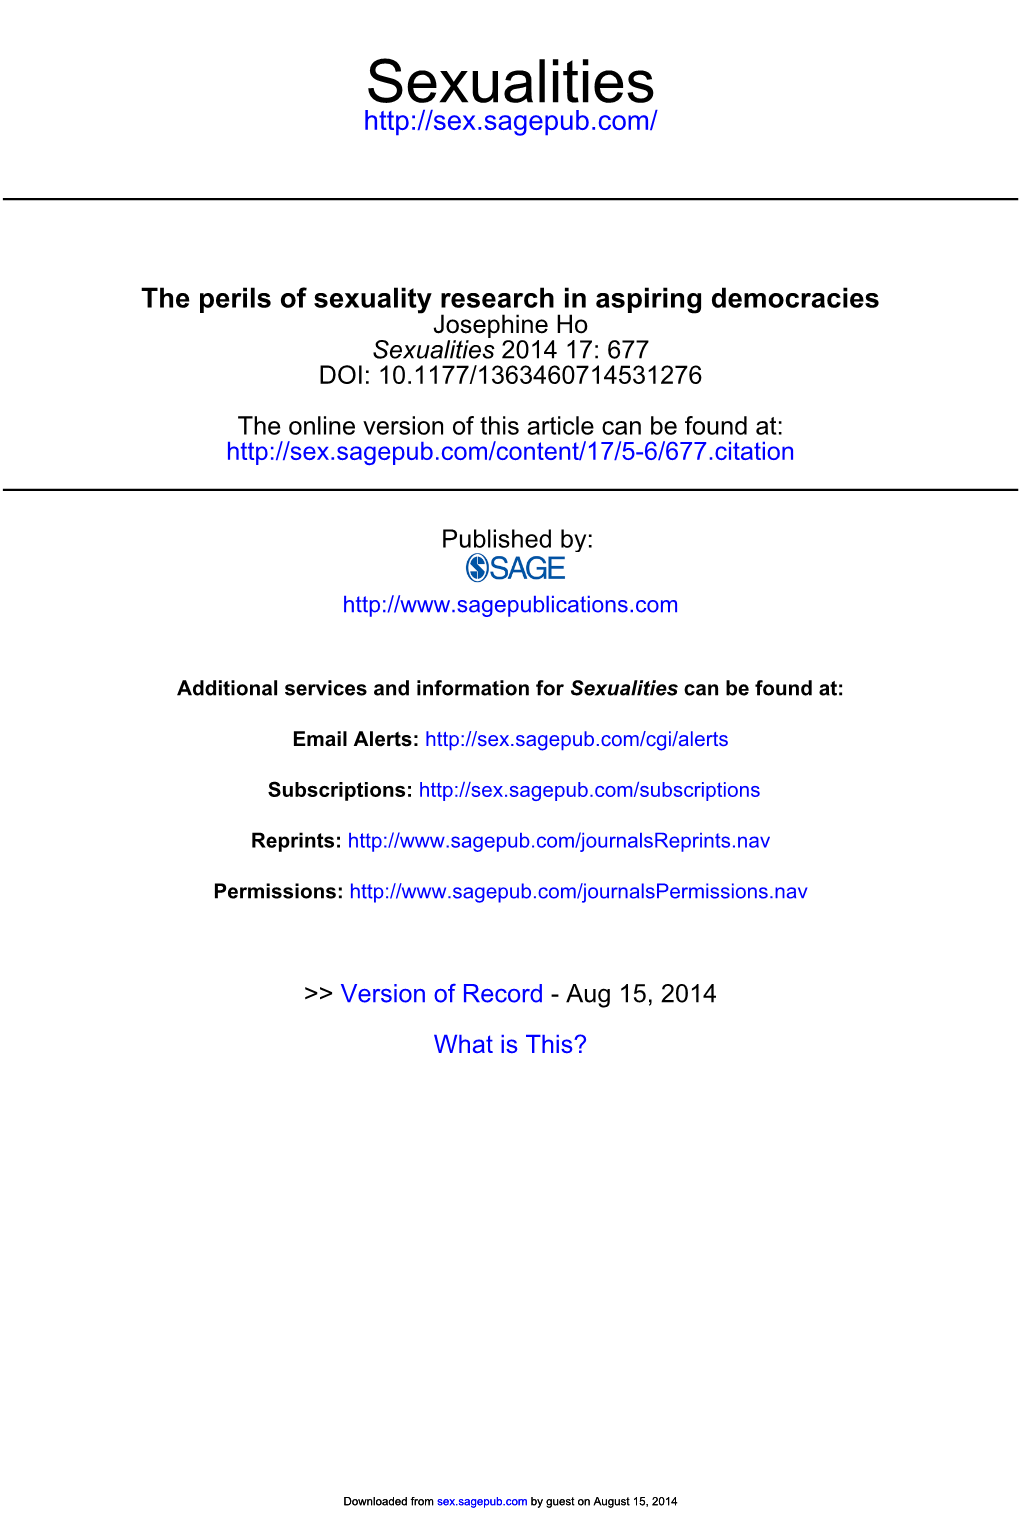 The Perils of Sexuality Research in Aspiring Democracies Josephine Ho Sexualities 2014 17: 677 DOI: 10.1177/1363460714531276